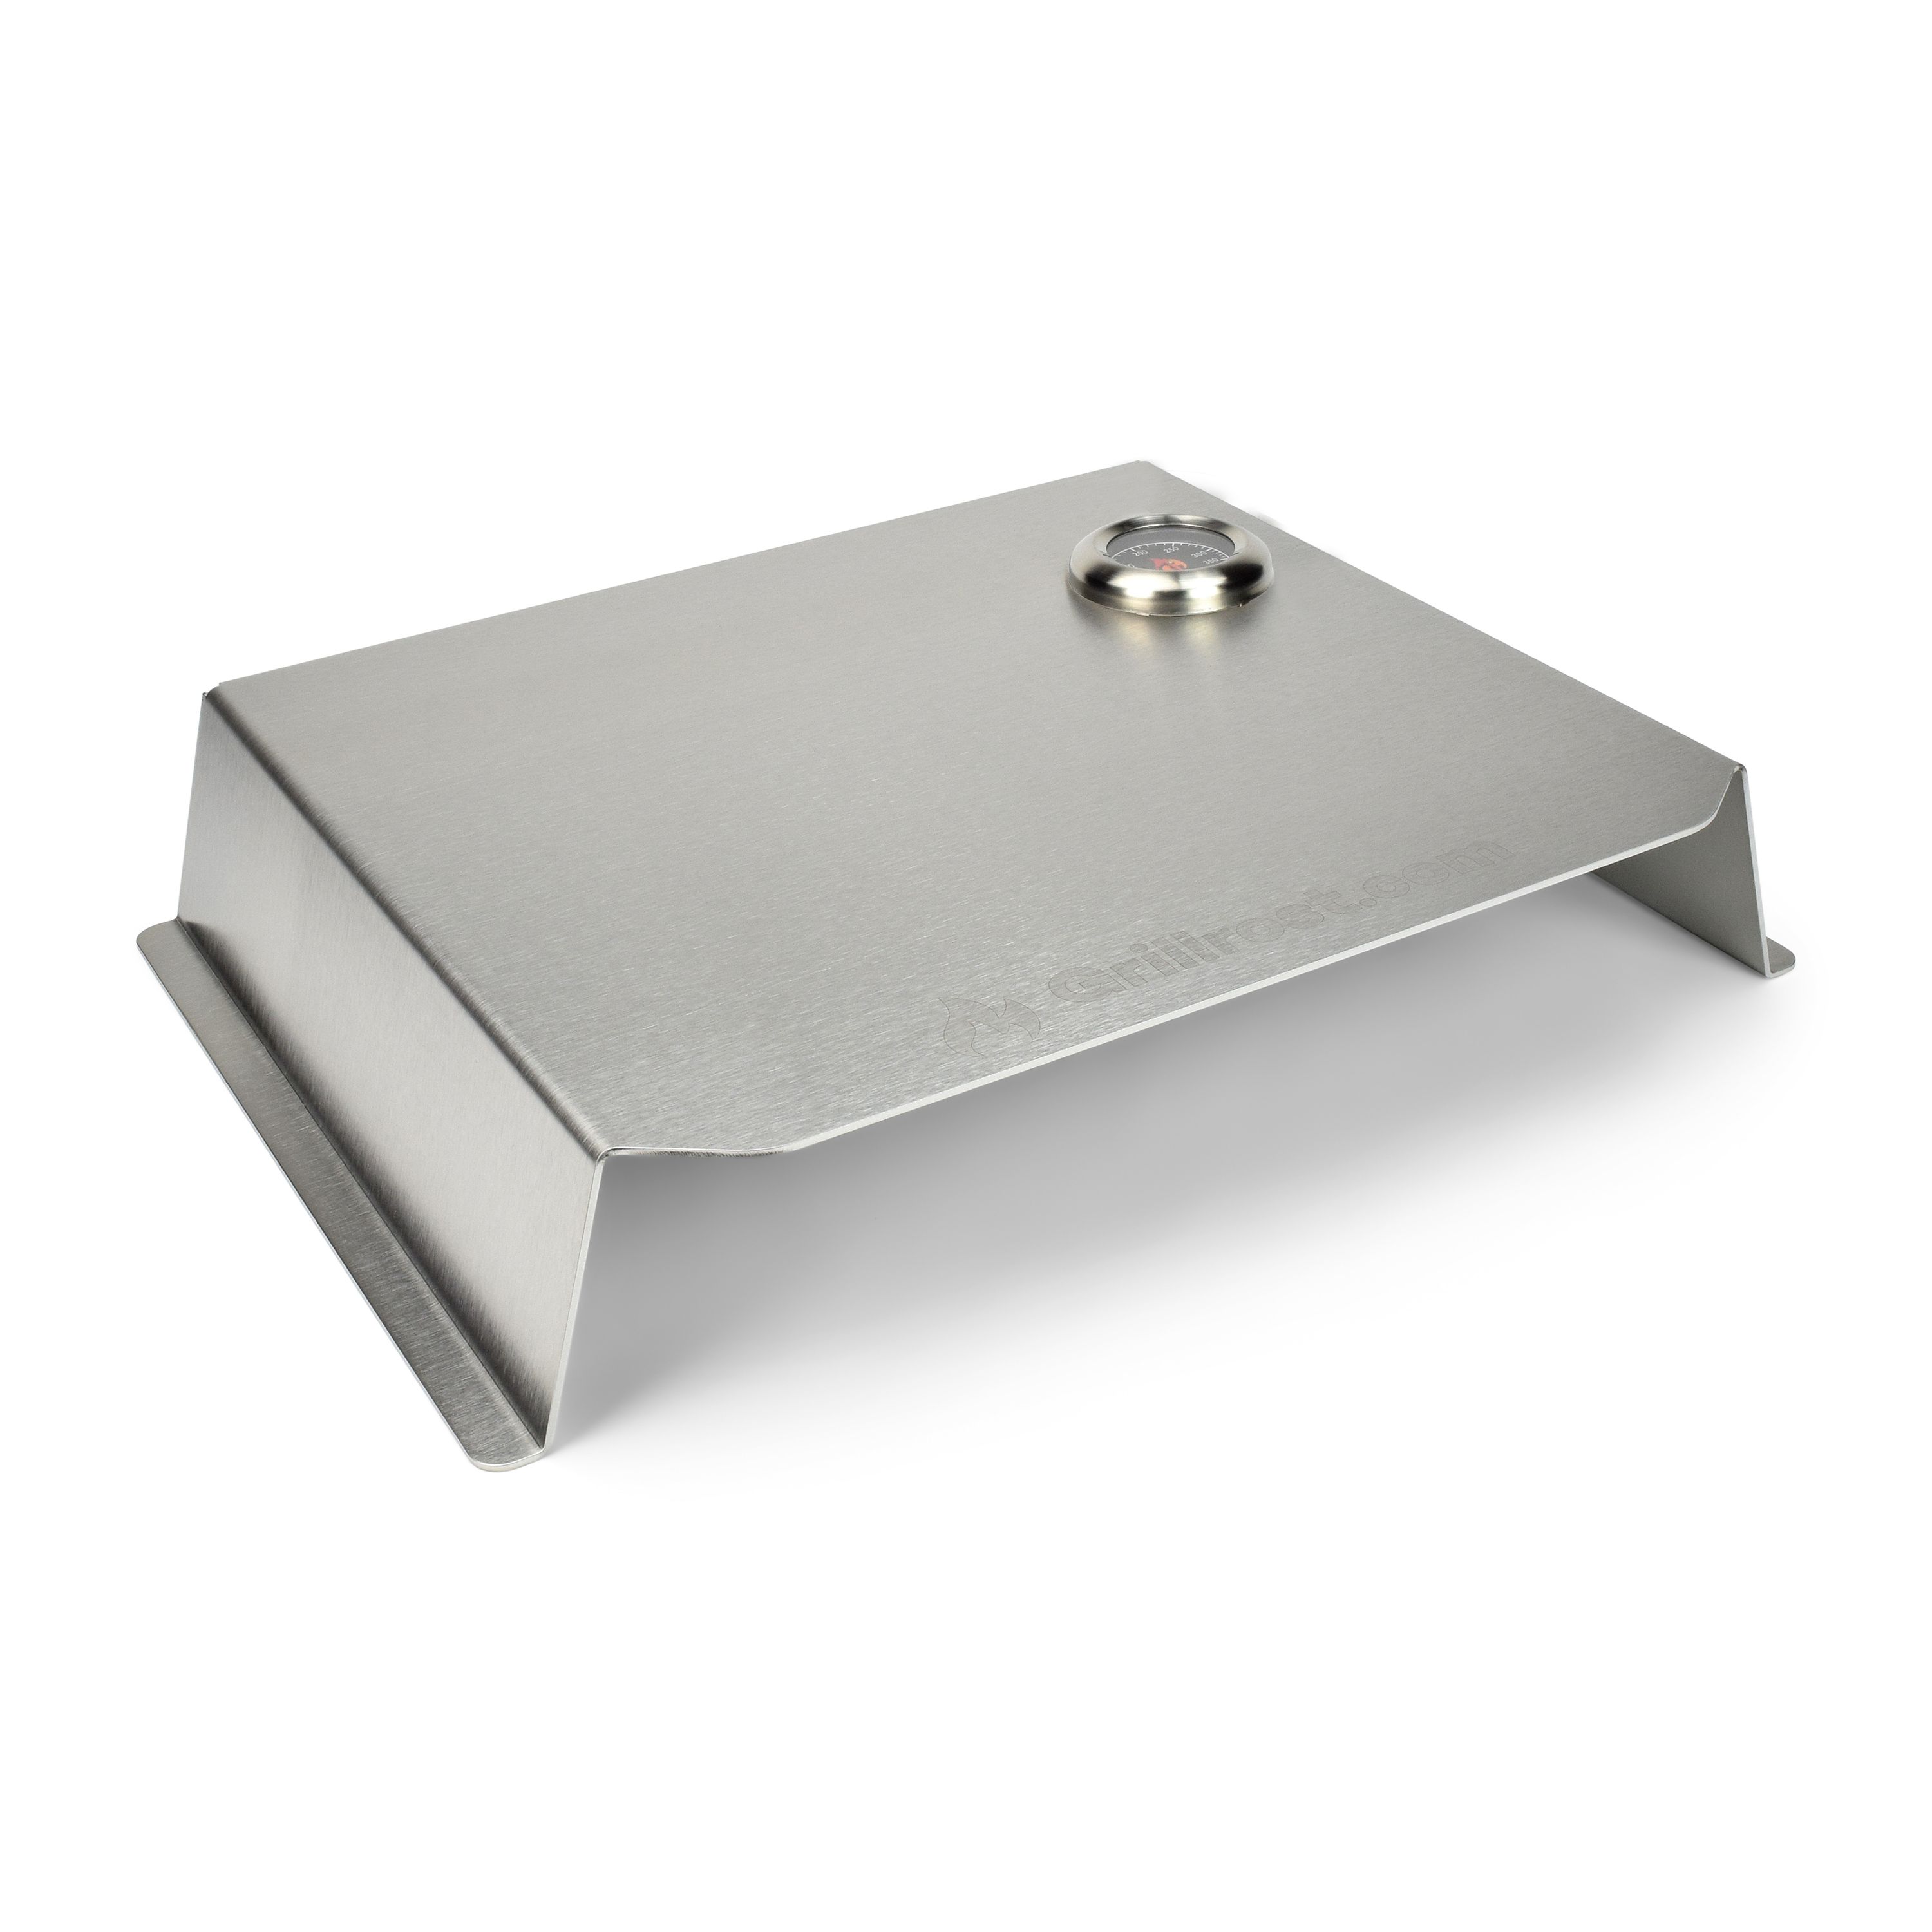 Gas Grill Pizza Attachment Stainless steel pizza cover for pizzas directly from the gas grill